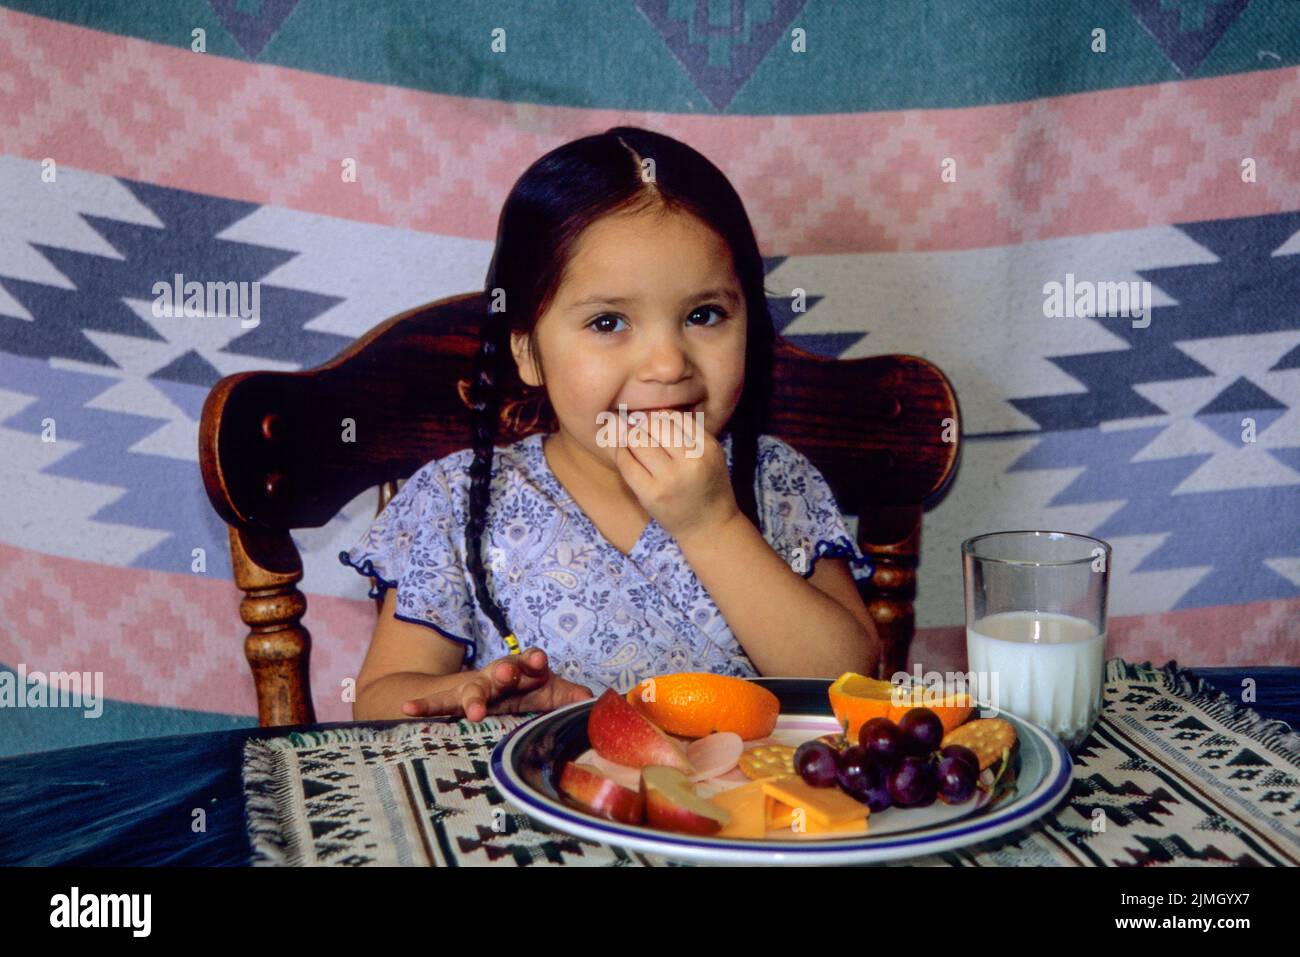 of fruit, cheese and milk while sitting in a chair at a table. Fort Hall Idaho Stock Photo